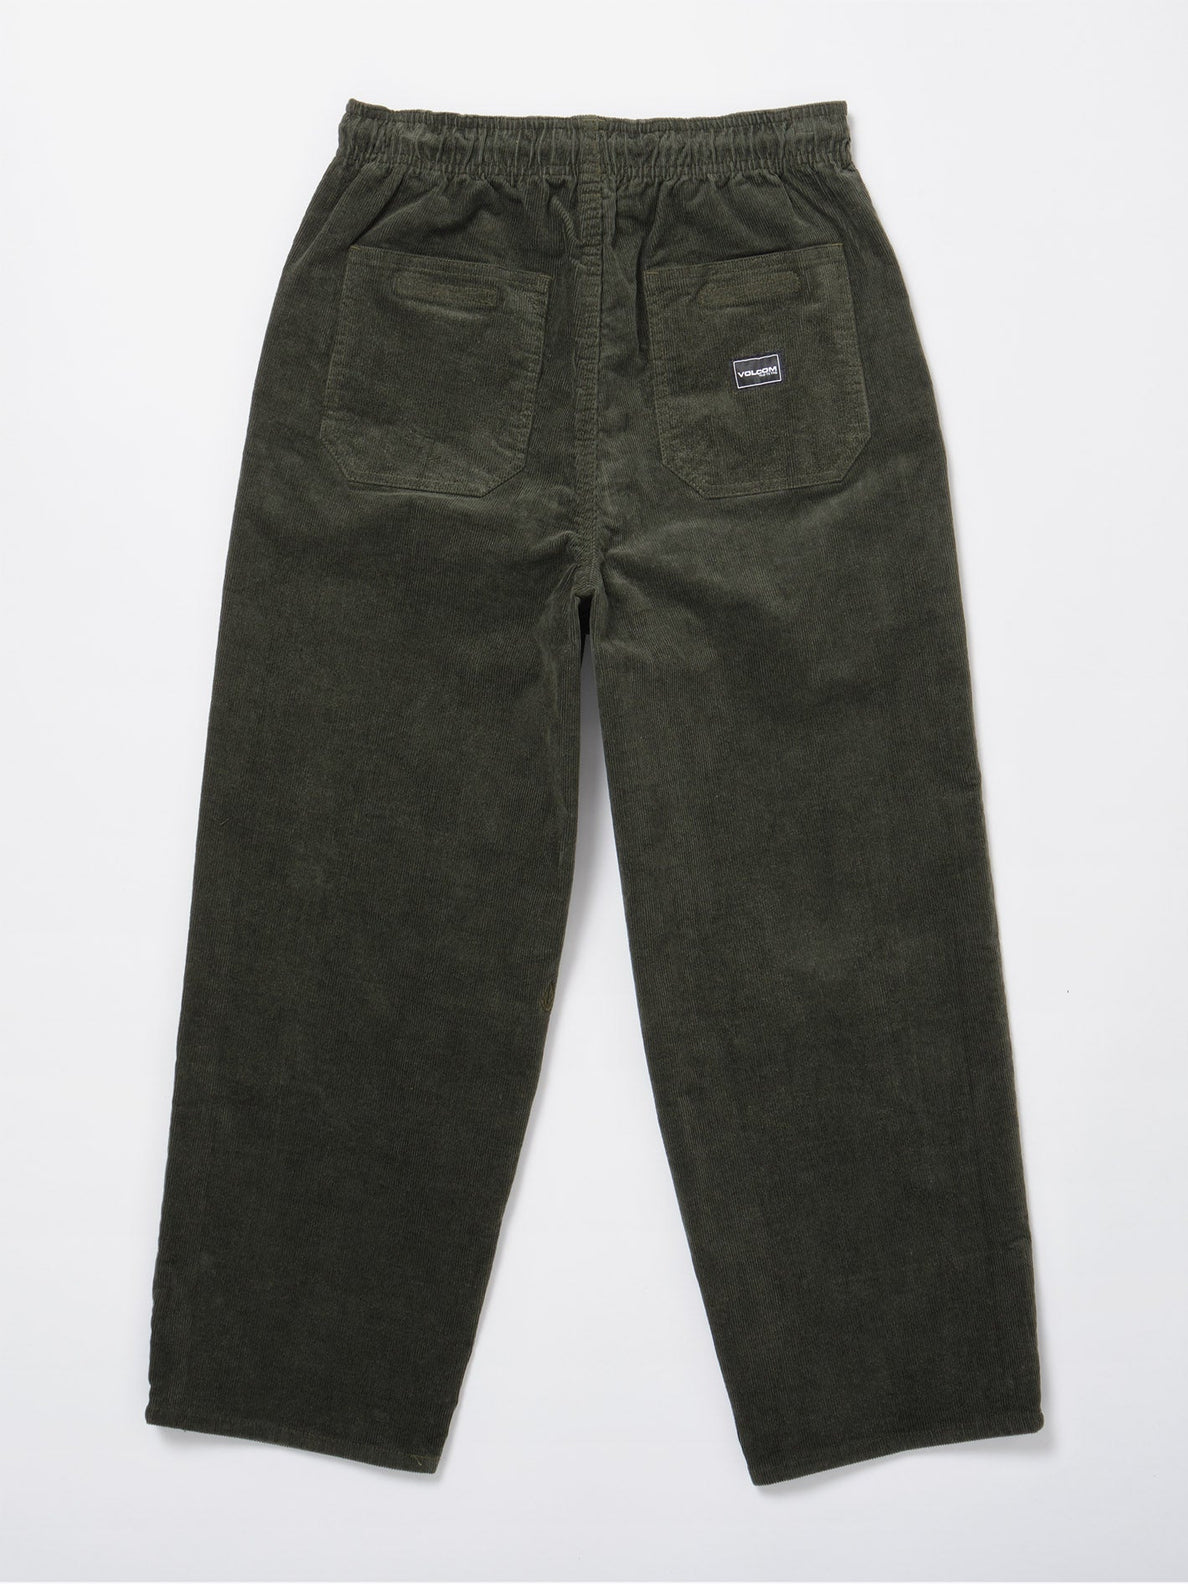 OUTER SPACED EW PANT (C1232232_SQD) [B]